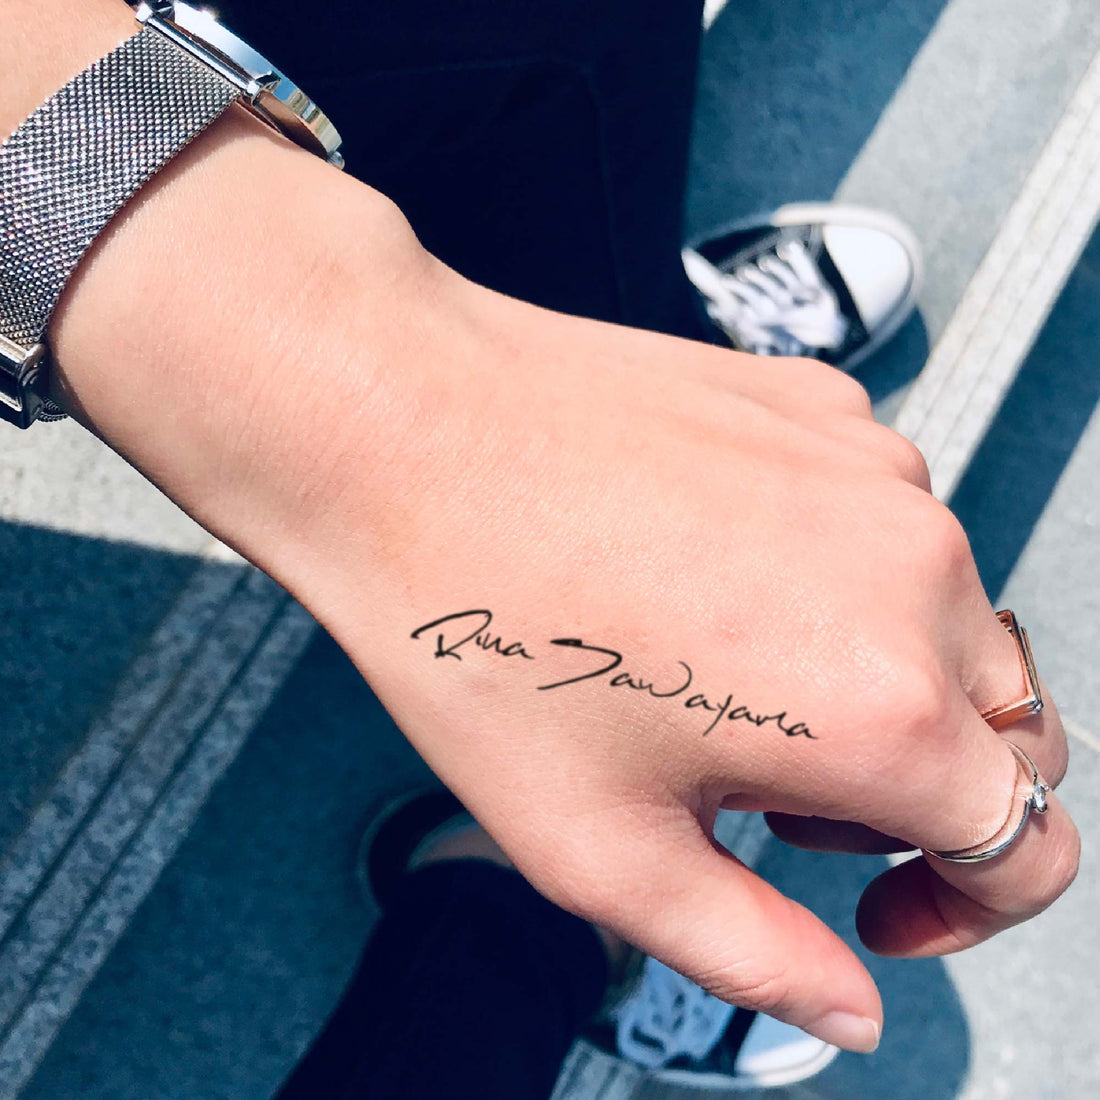 Rina Sawayama custom temporary tattoo sticker design idea inspiration meanings removal arm wrist hand words font name signature calligraphy lyrics tour concert outfits merch accessory gift souvenir costumes wear dress up code